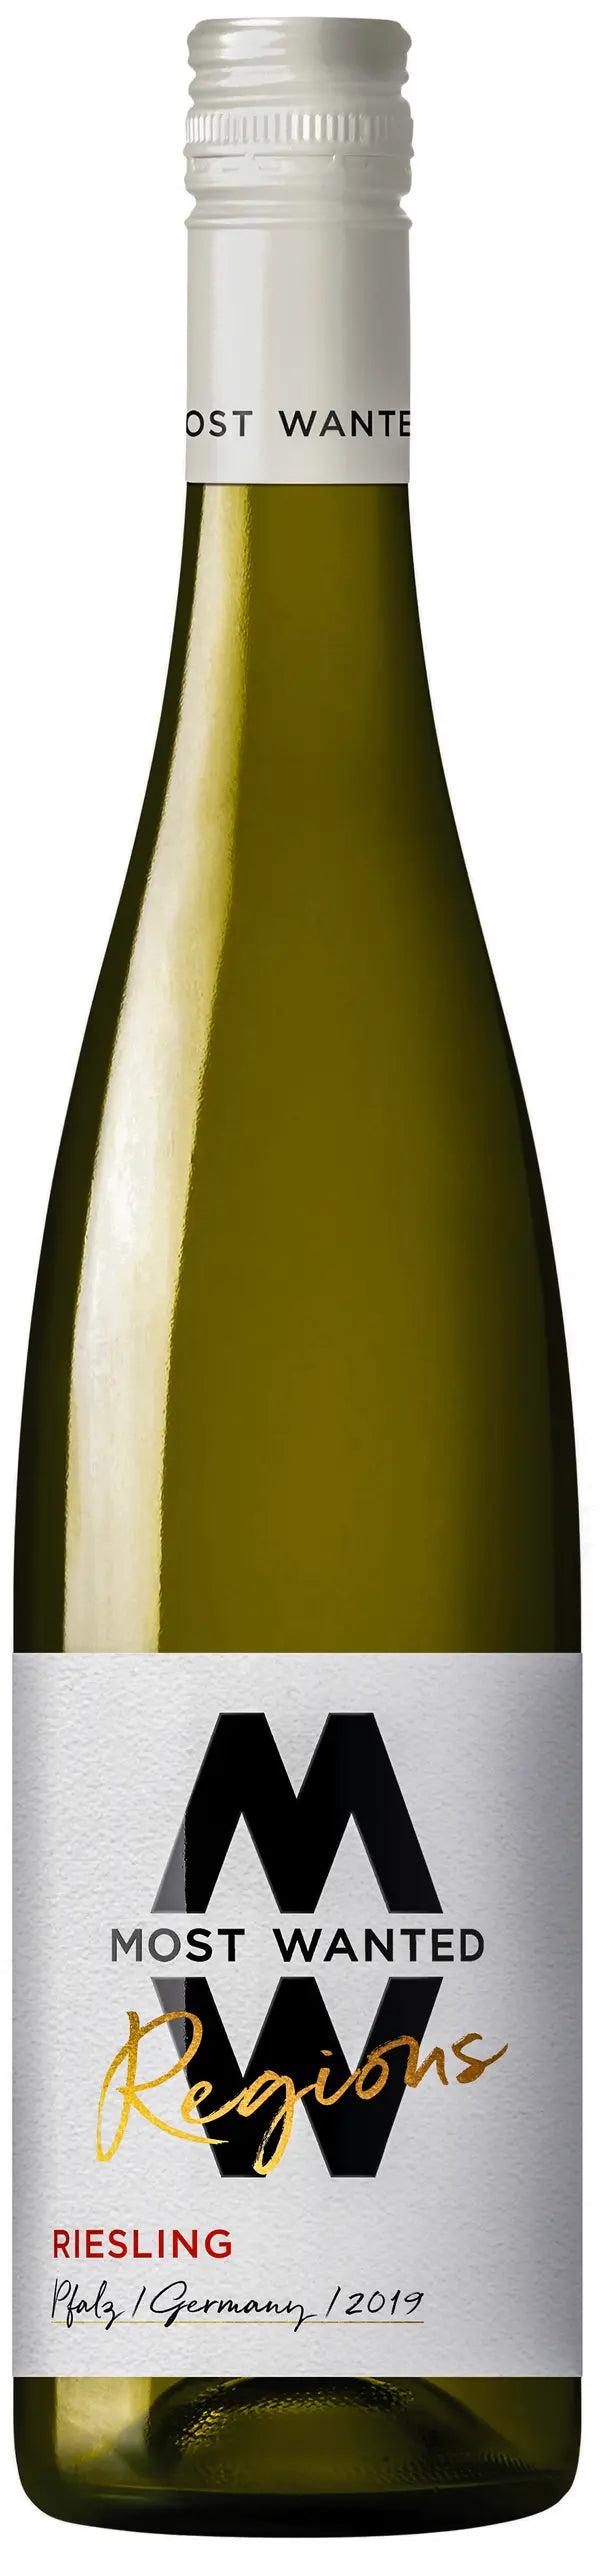 A wine product picture of Most Wanted Regions Riesling}